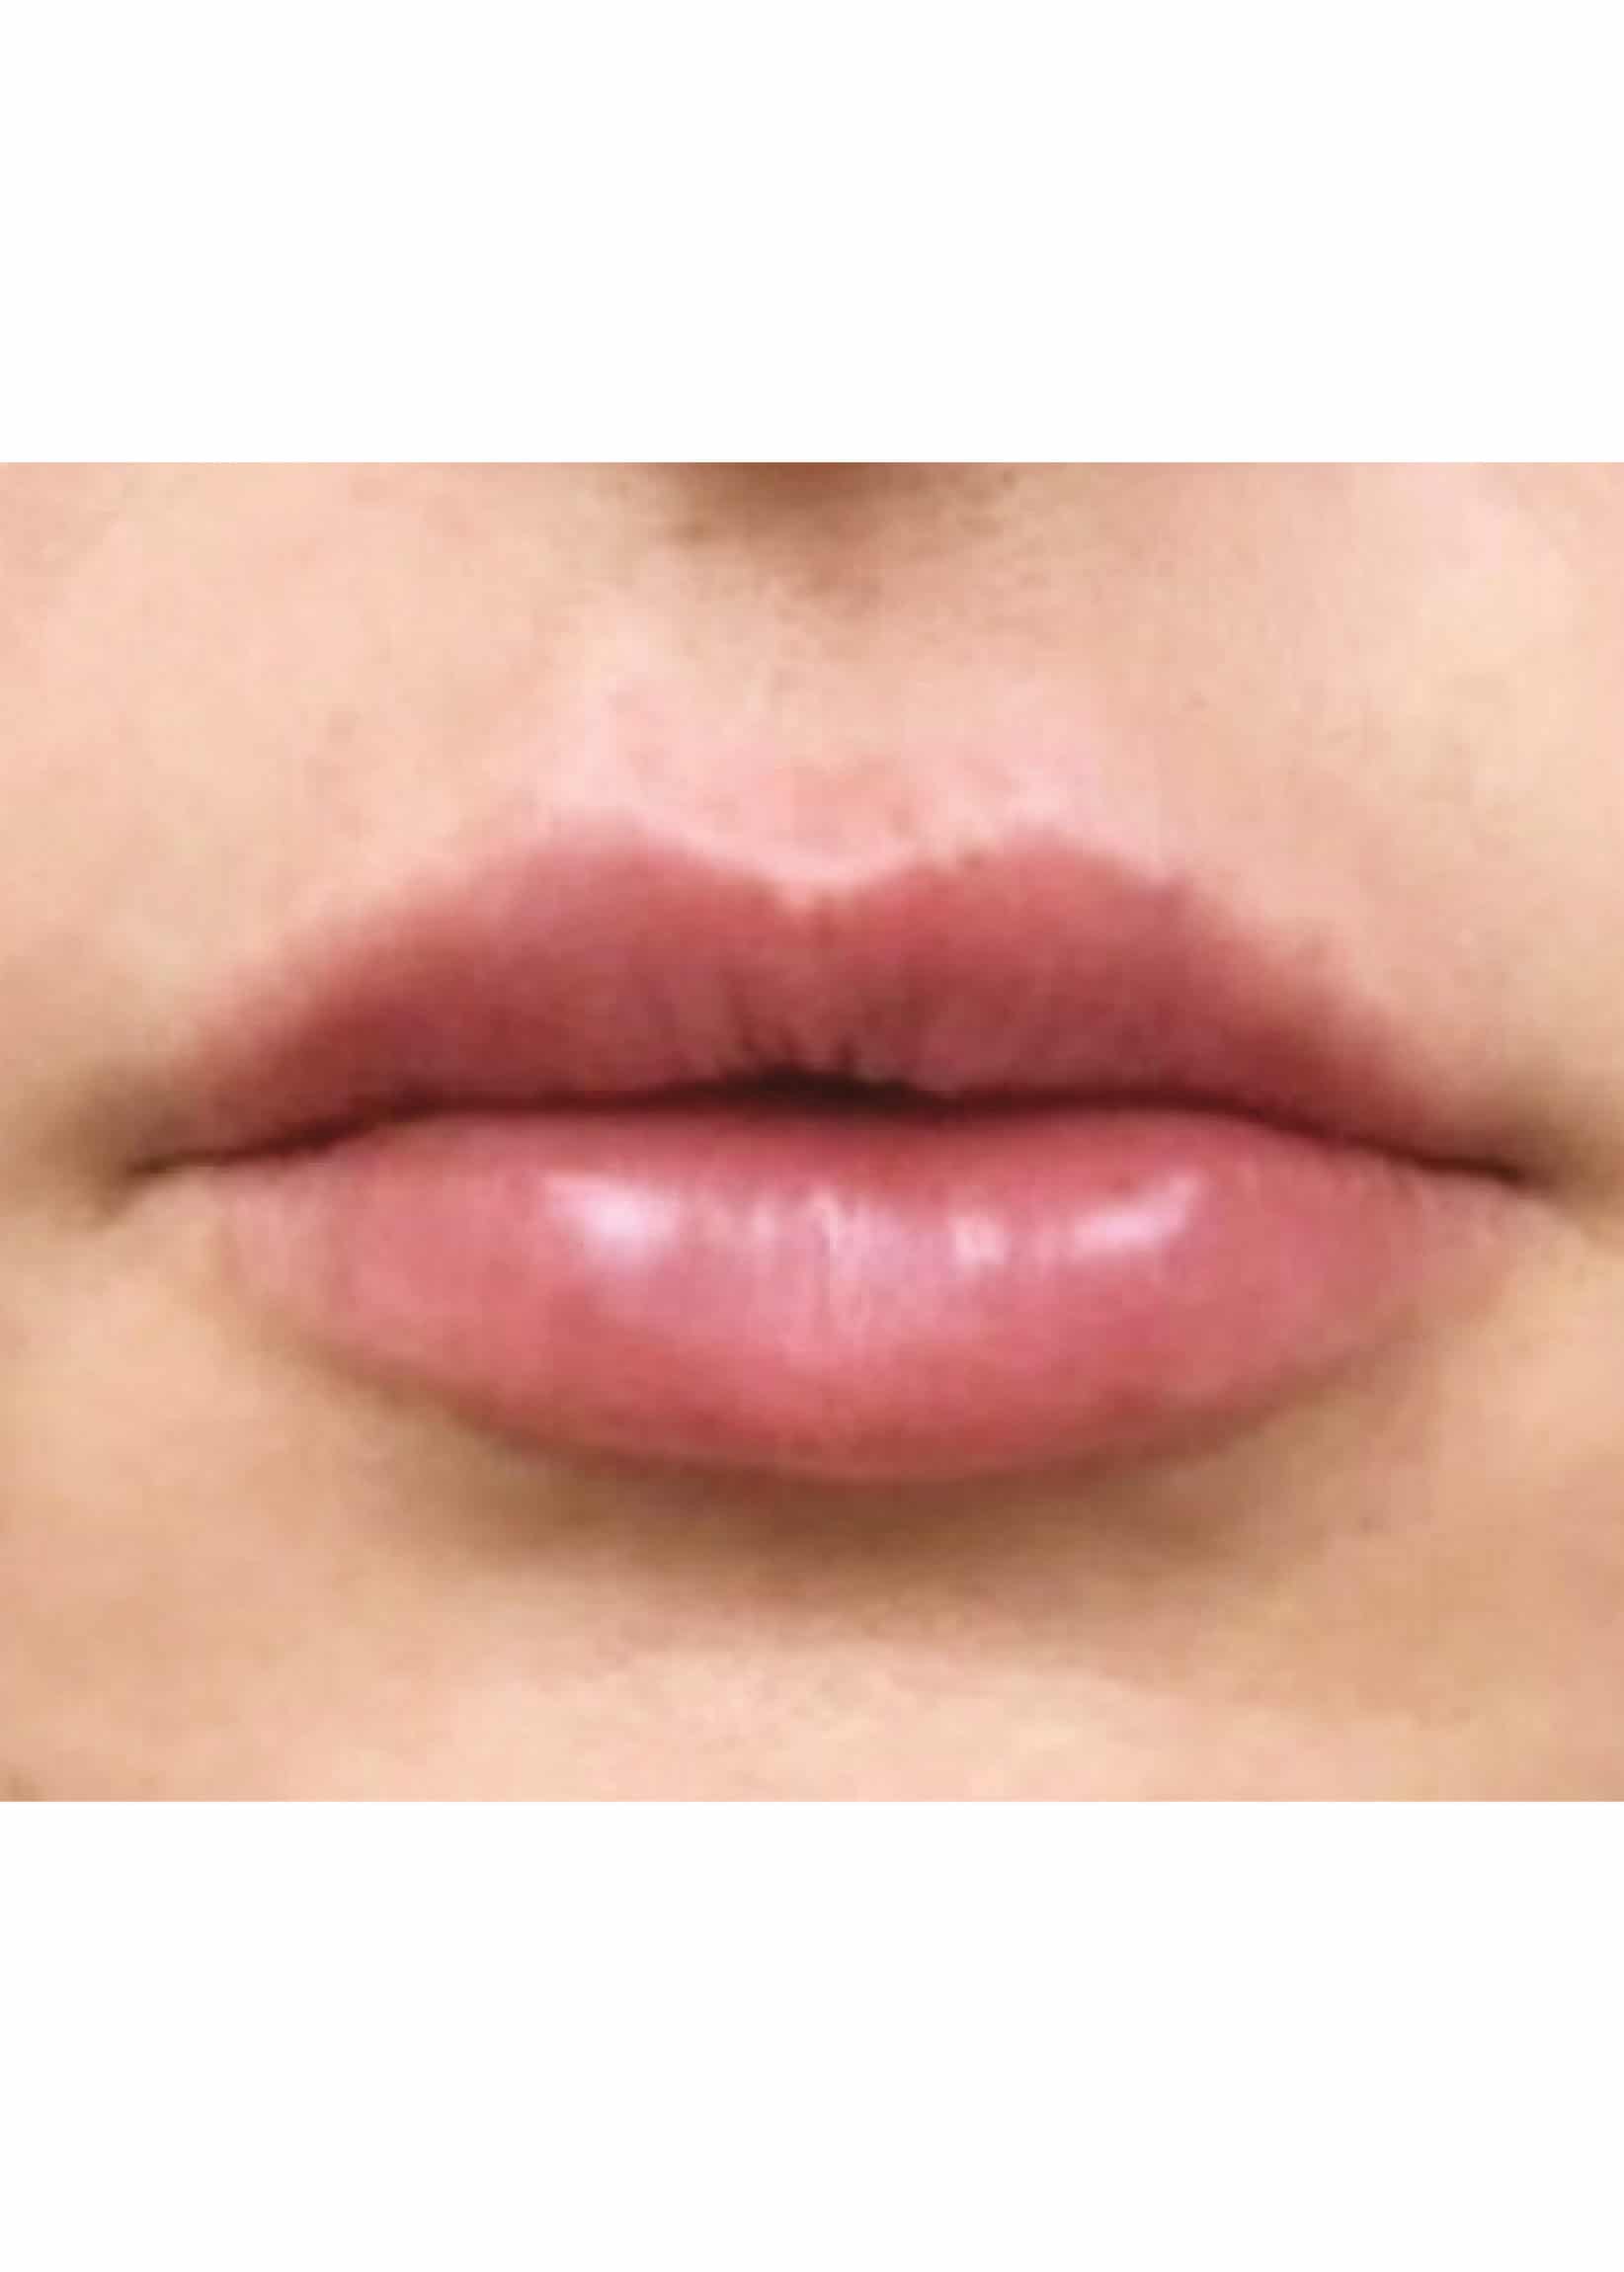 TheSkinCenter ProviderPages TiffaneyBeddow LipFiller After 2 scaled 1